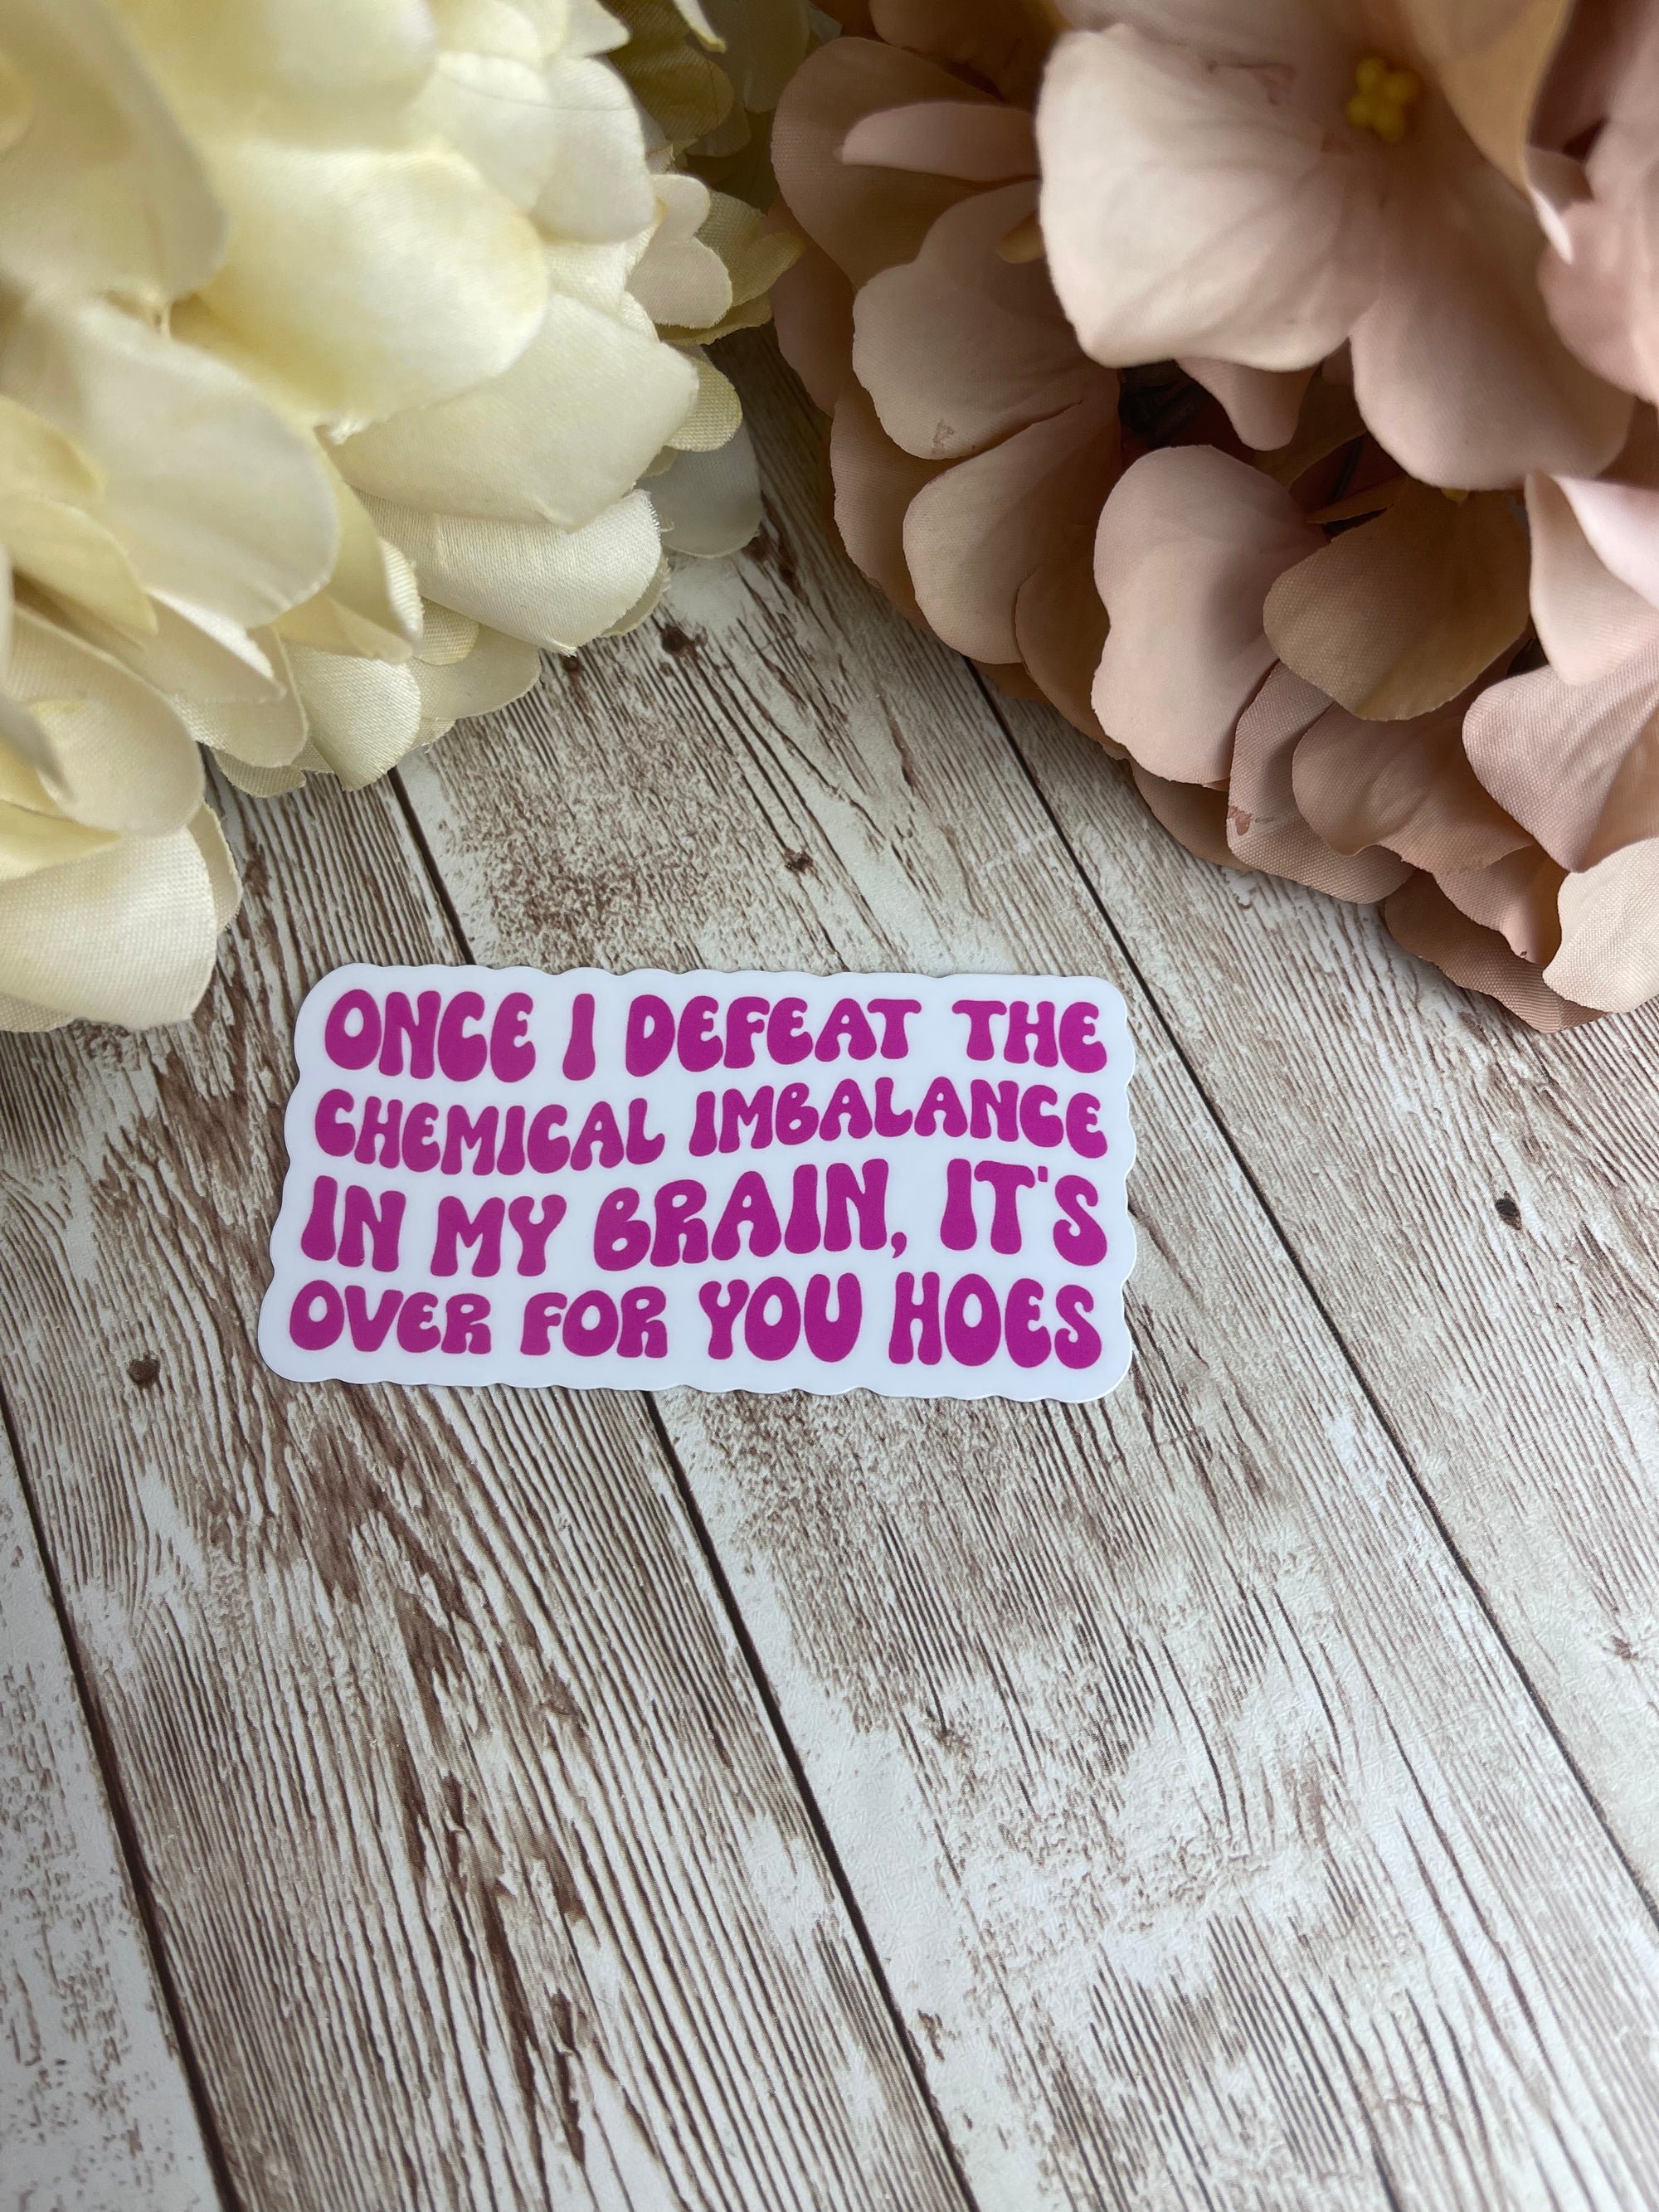 It’s over for you hoes - Sticker